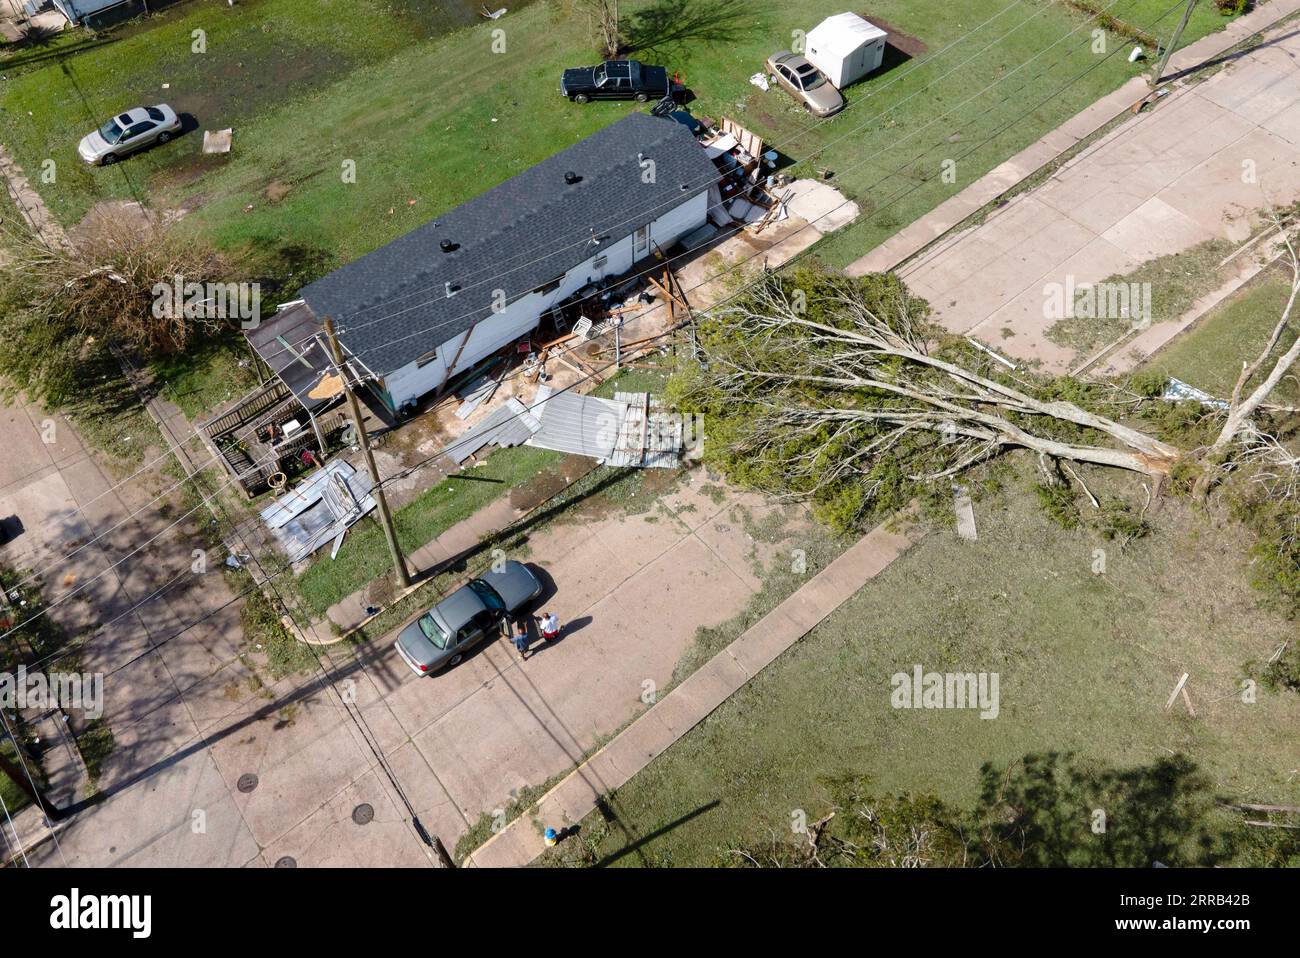 210831 -- HOUMA, Aug. 31, 2021 -- A tree is seen uprooted by Hurricane Ida in Houma, Louisiana, the United States, Aug. 30, 2021. With stranded people waiting for rescue on damaged roofs, flooded roads blocked by downed trees and power lines, and over one million people without power through Monday morning, Hurricane Ida has wreaked widespread havoc since its landfall in southern U.S. state of Louisiana on Sunday. Photo by /Xinhua U.S.-LOUISIANA-HOUMA-HURRICANE IDA-AFTERMATH NickxWagner PUBLICATIONxNOTxINxCHN Stock Photo